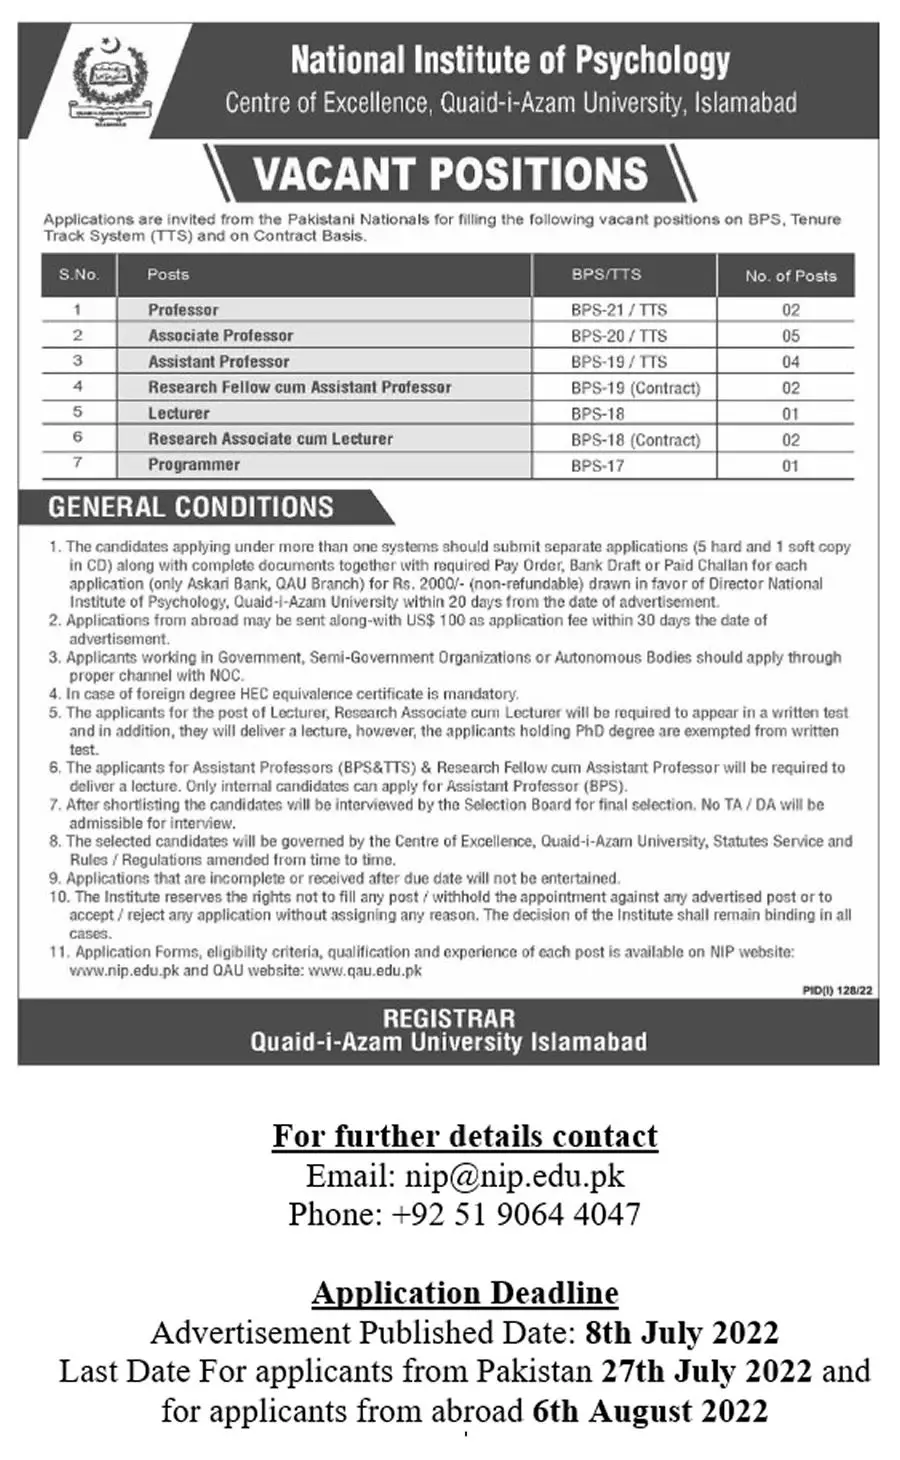 Faculty Jobs at National Institute of Psychology QAU July 2022